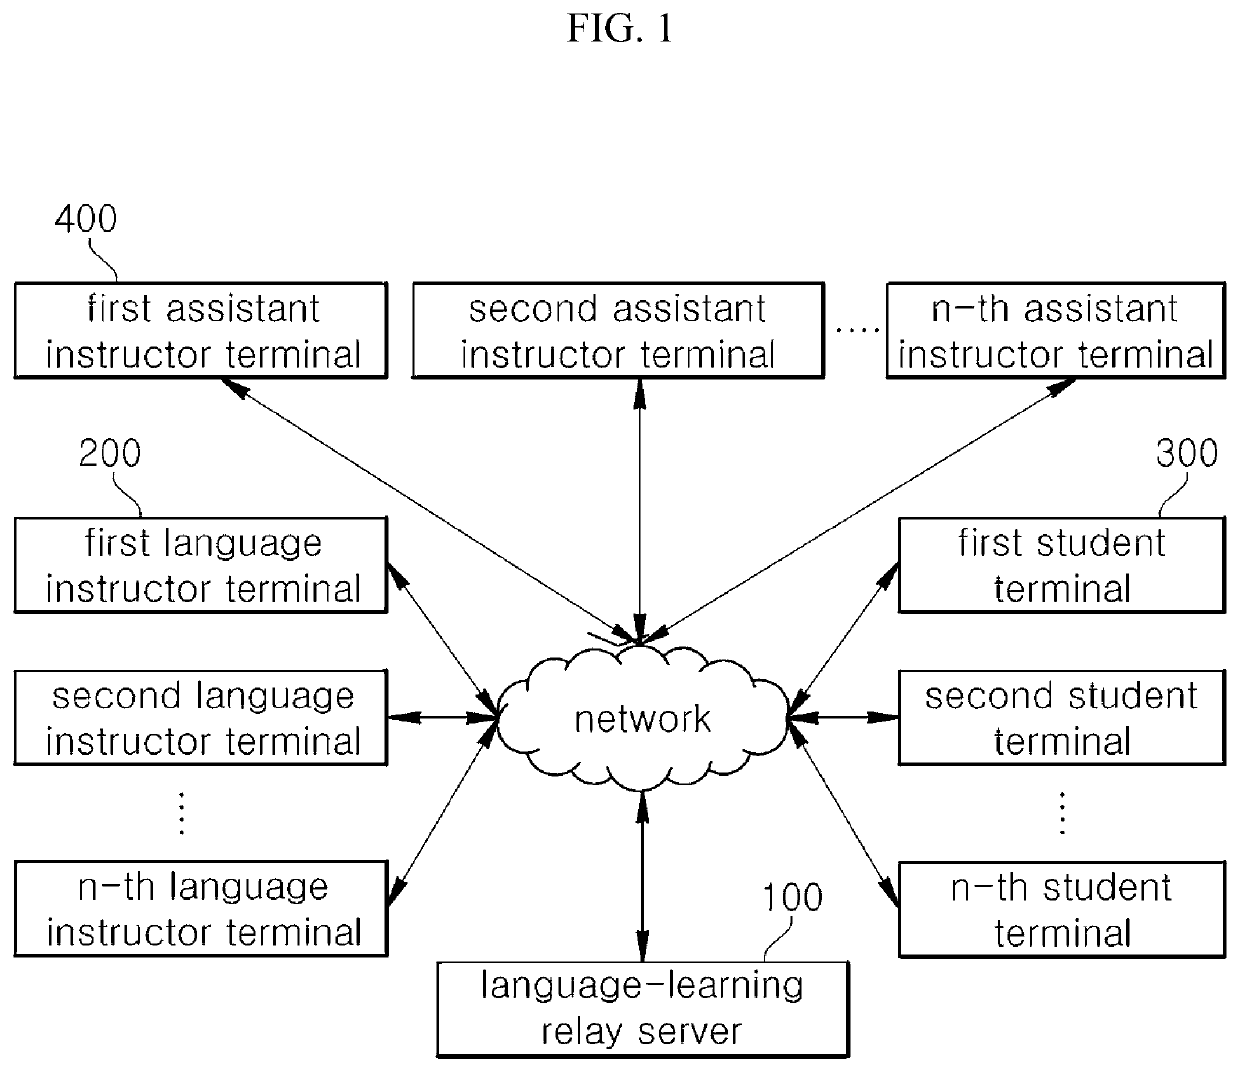 Relay server for one-to-many matched language learning and method for teaching a language